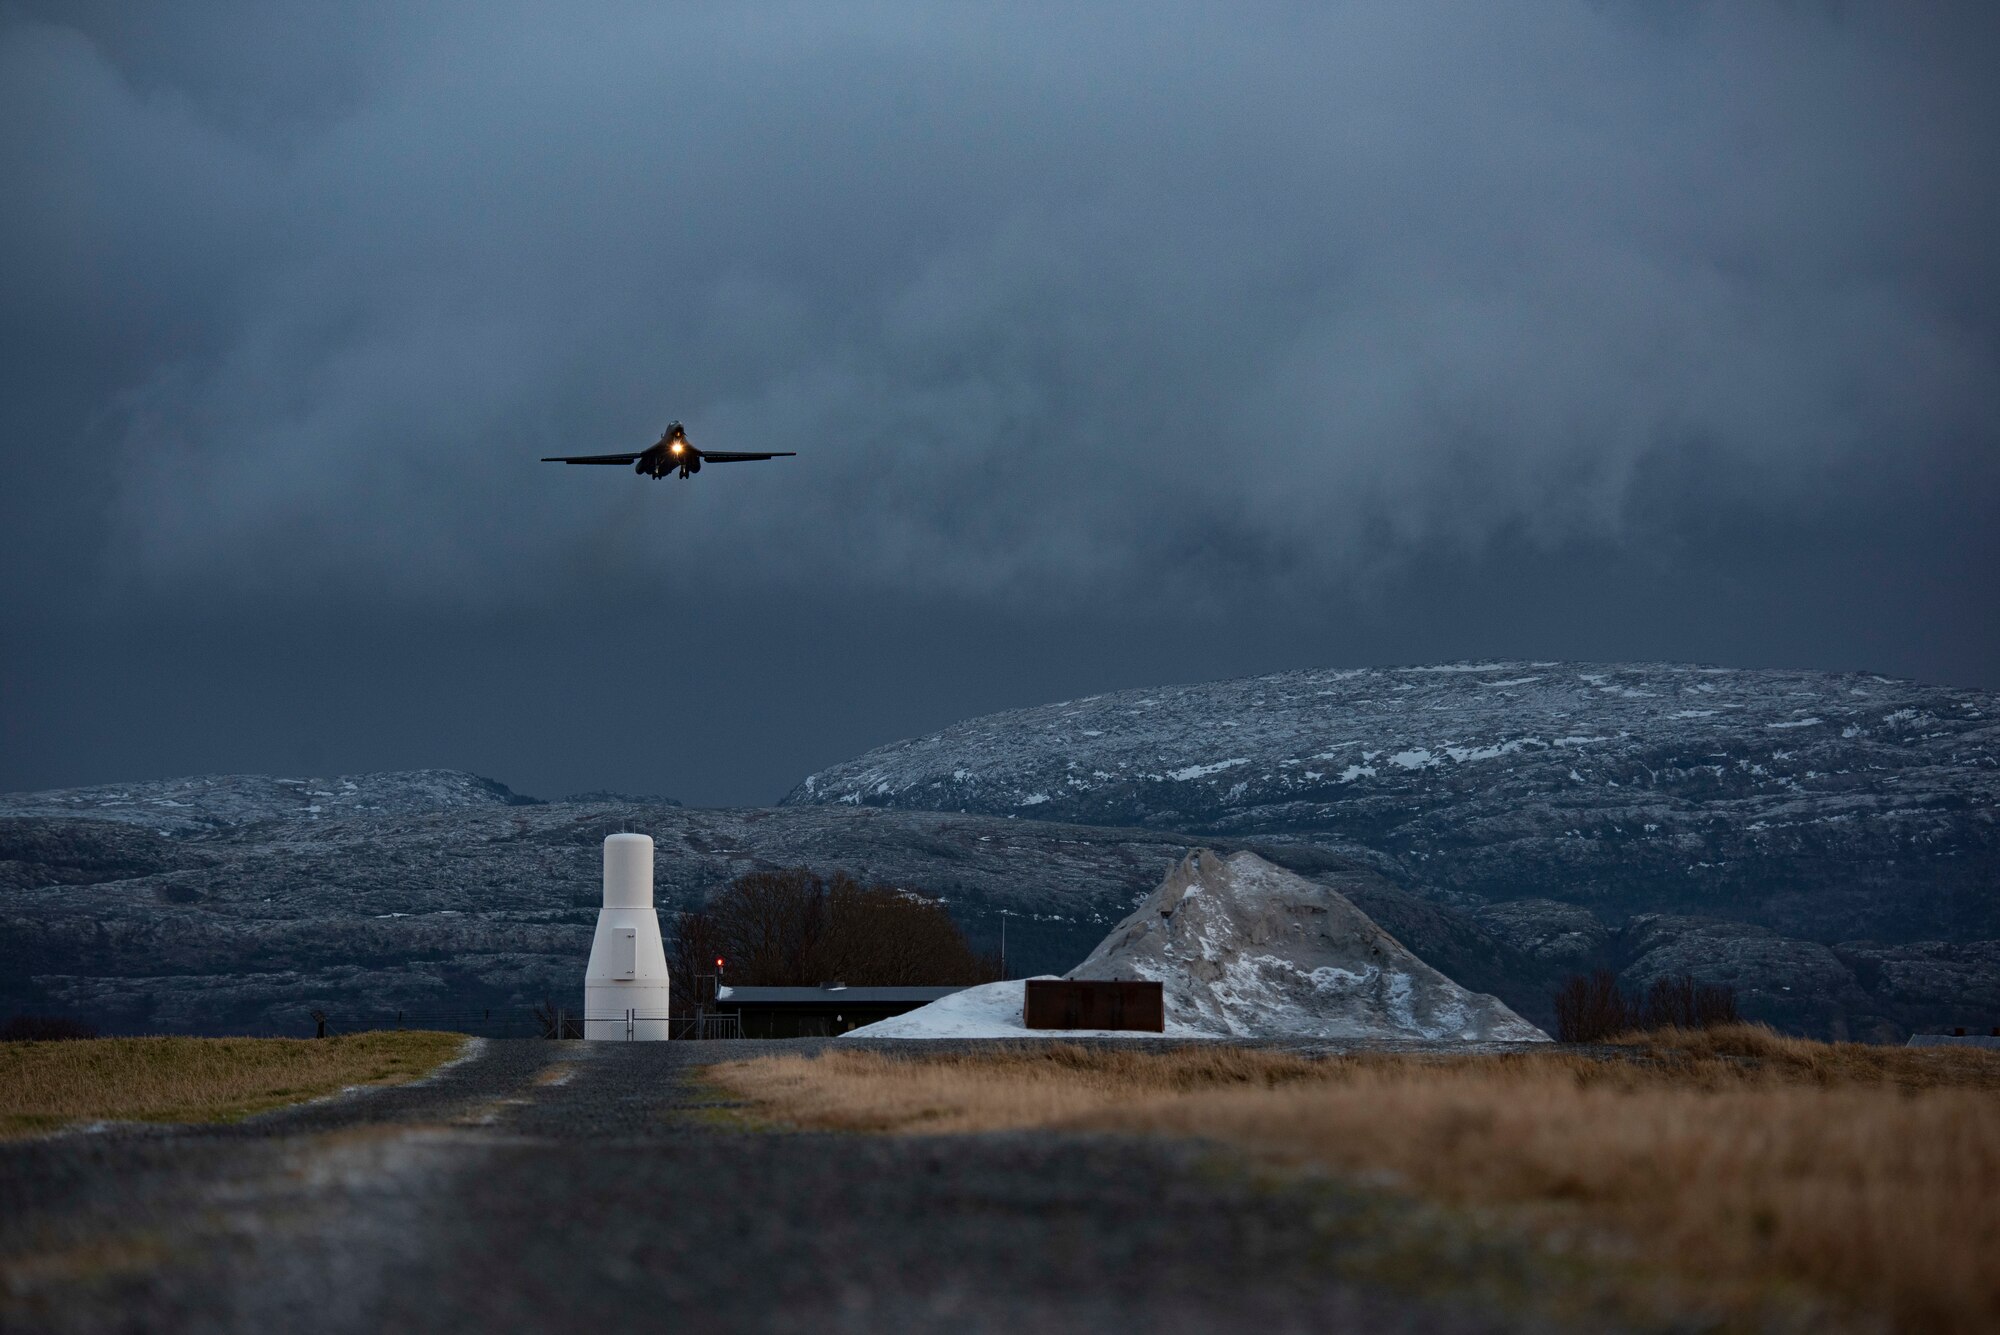 A B-1B Lancer assigned to the 9th Expeditionary Bomb Squadron prepares to land at Ørland Air Force Station, Norway, March 3, 2021. Working with ally nations within the NATO alliance demonstrates solidarity and proves U.S. commitment to improving interoperability. (U.S. Air Force photo by Airman 1st Class Colin Hollowell)